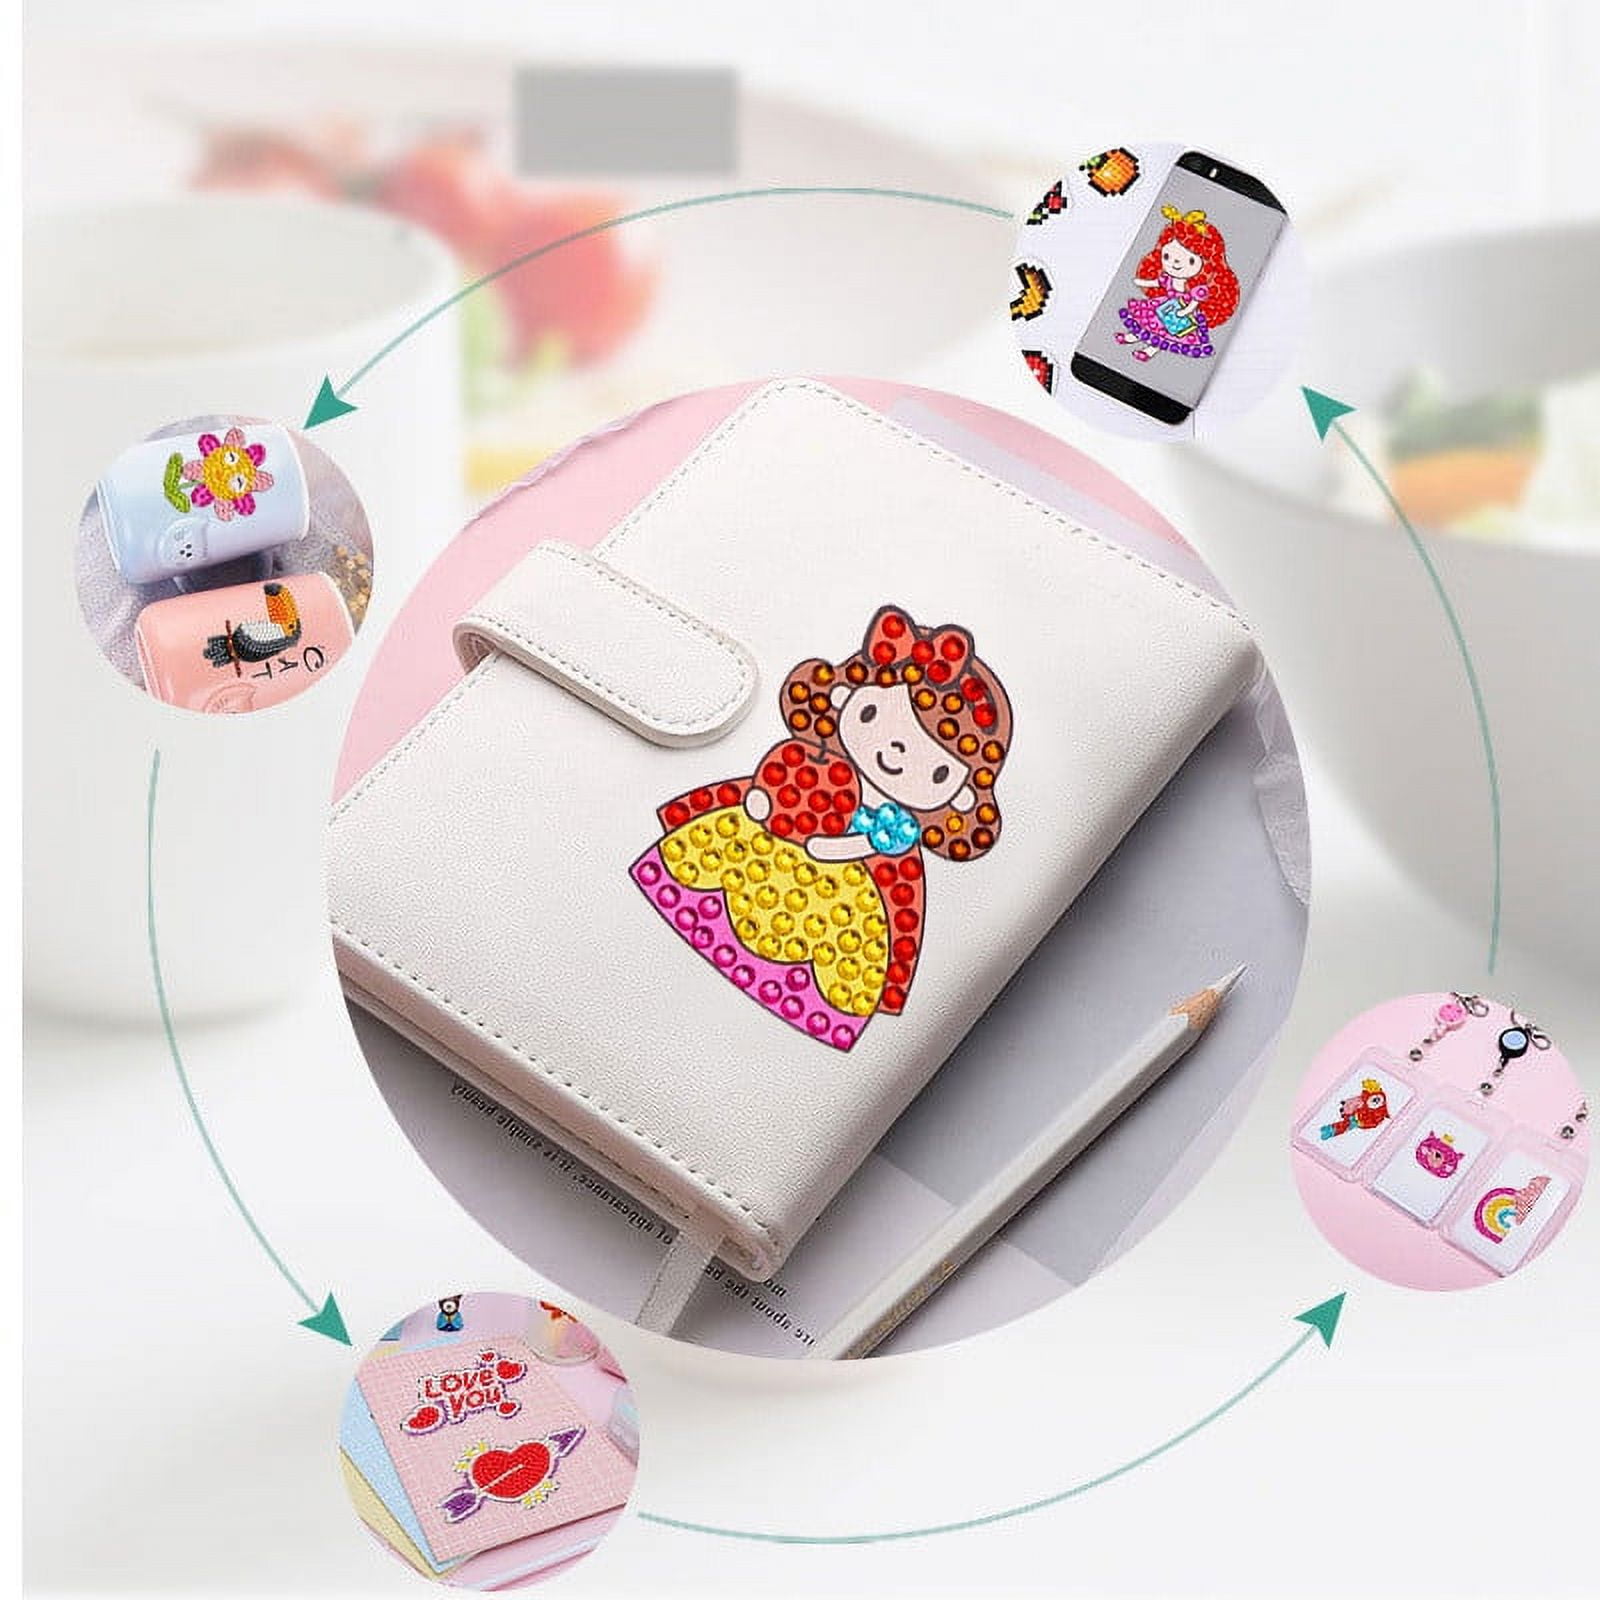  Glittering Craft 5D Painting DIY Project Kits Material Easy  Operate Colorful Stickers Teens Favor Art Crafts Craft Supplies for Kids  6-8 Craft Supplies & Materials Clearance Craft Supplies : Toys 